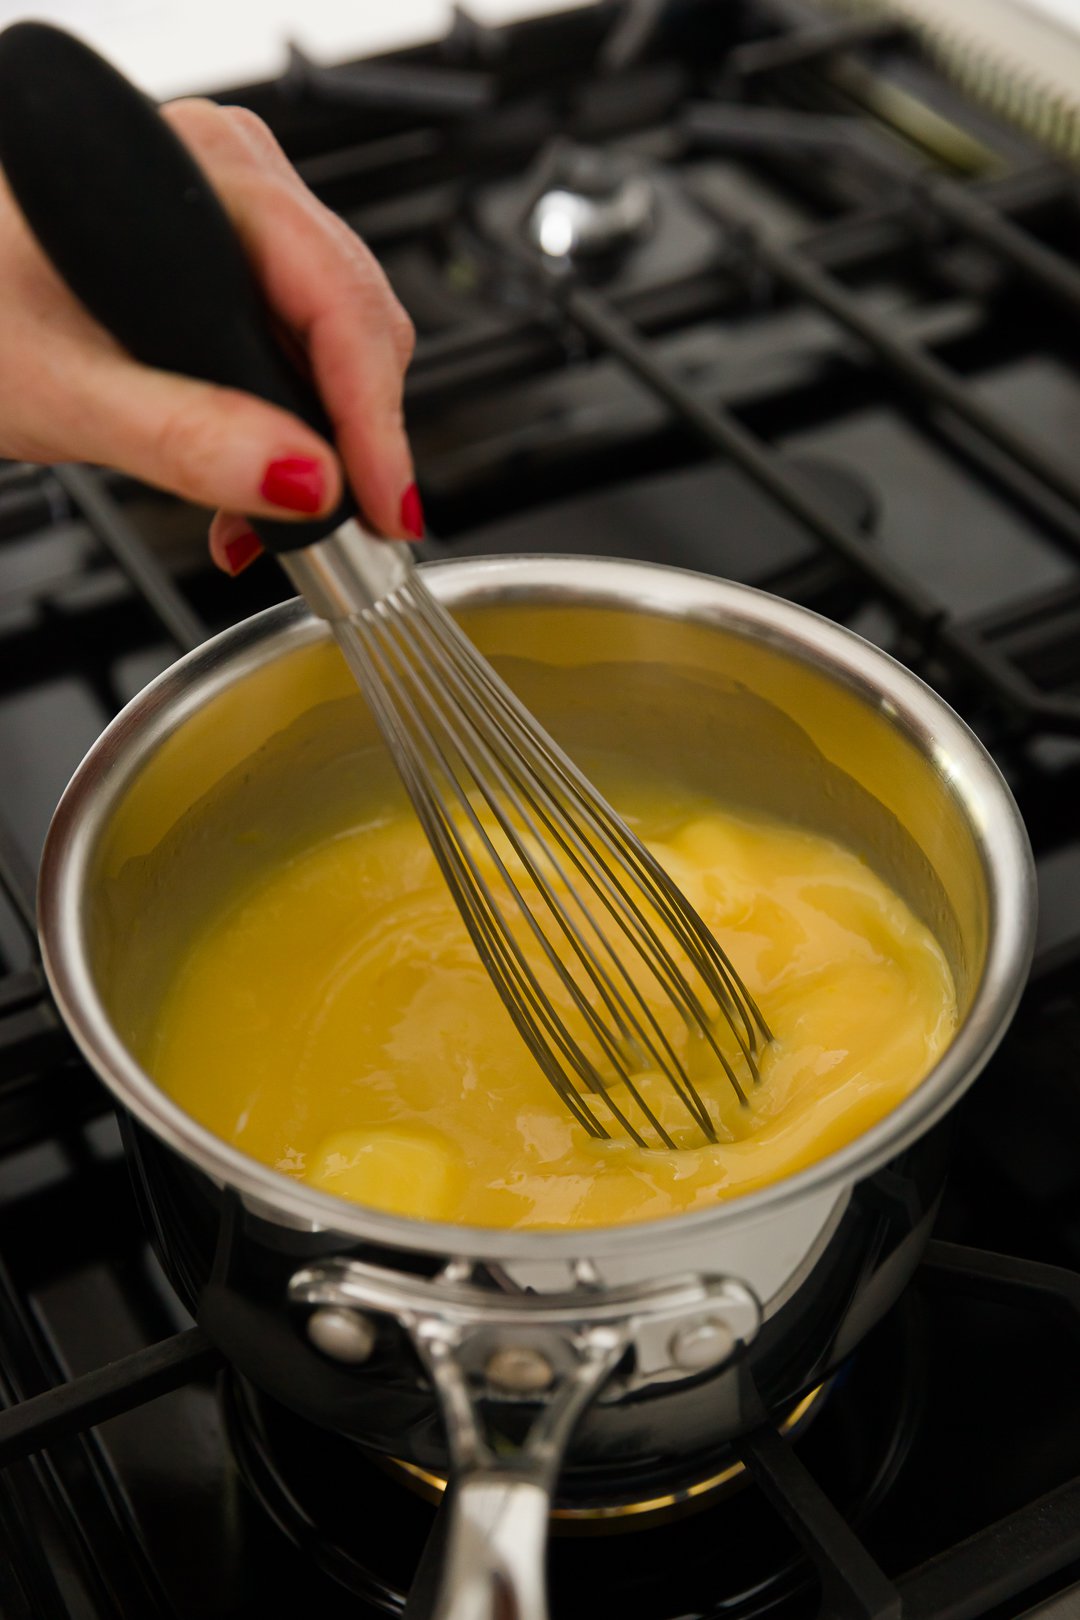 Whisking eggs and other ingredients on stove